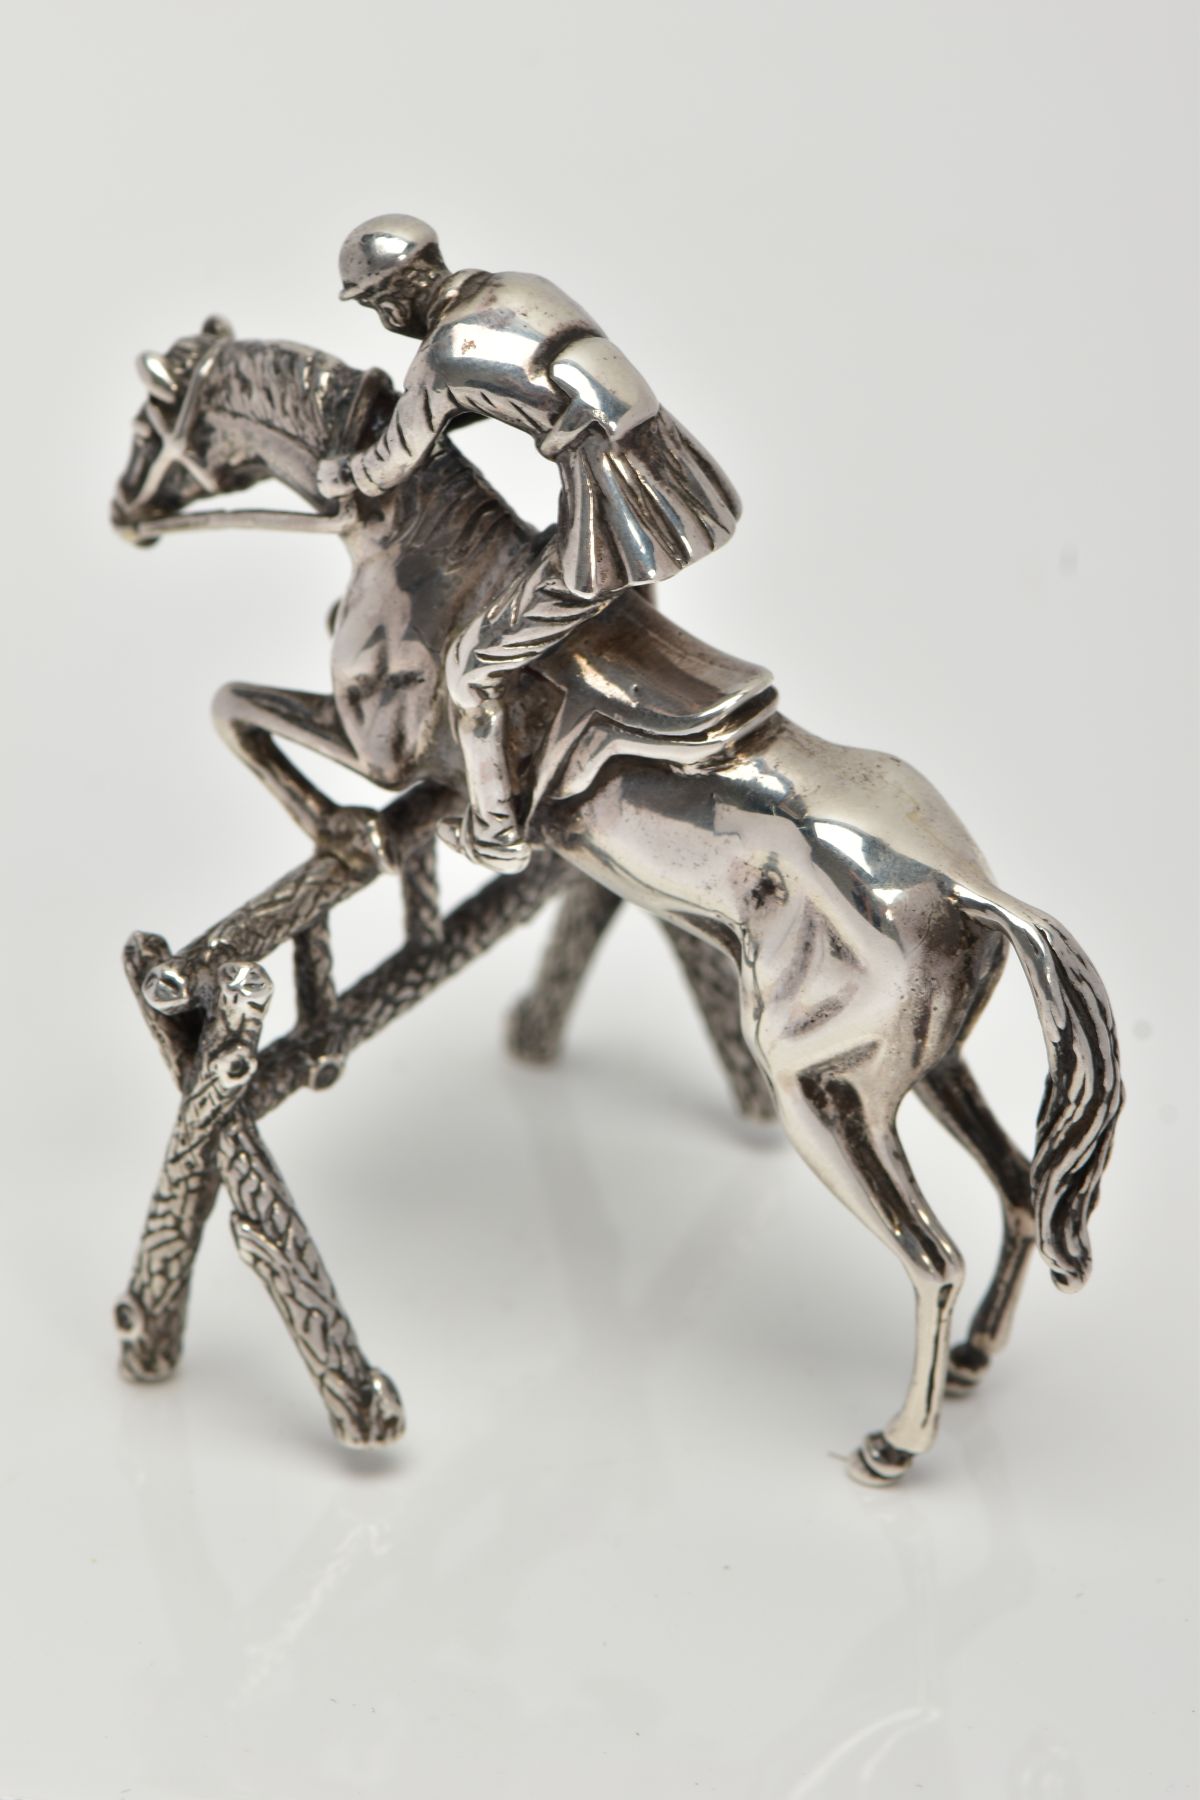 A SILVER SMALL HORSE AND JOCKEY ORNAMENT, measuring approximately 50mm in length x 70mm in height, - Image 5 of 7